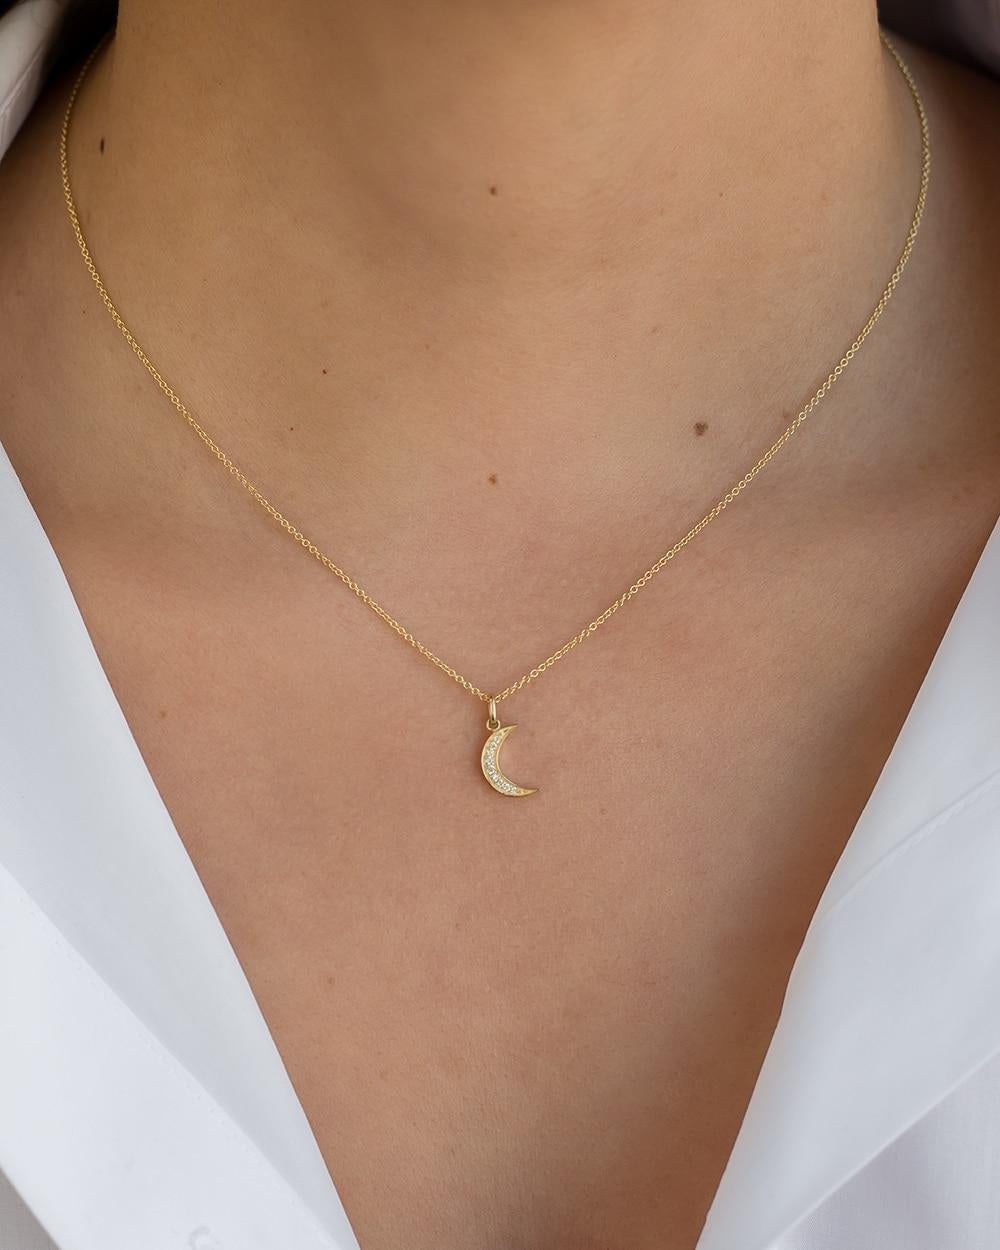 Timeless and dainty 14k solid gold pave diamond small moon charm hanging form a cable link necklace. A perfect necklace by itself or layered, wear it day or night, up or down. This necklace is effortlessly chic!

Made in L.A.

Carat diamond weight: